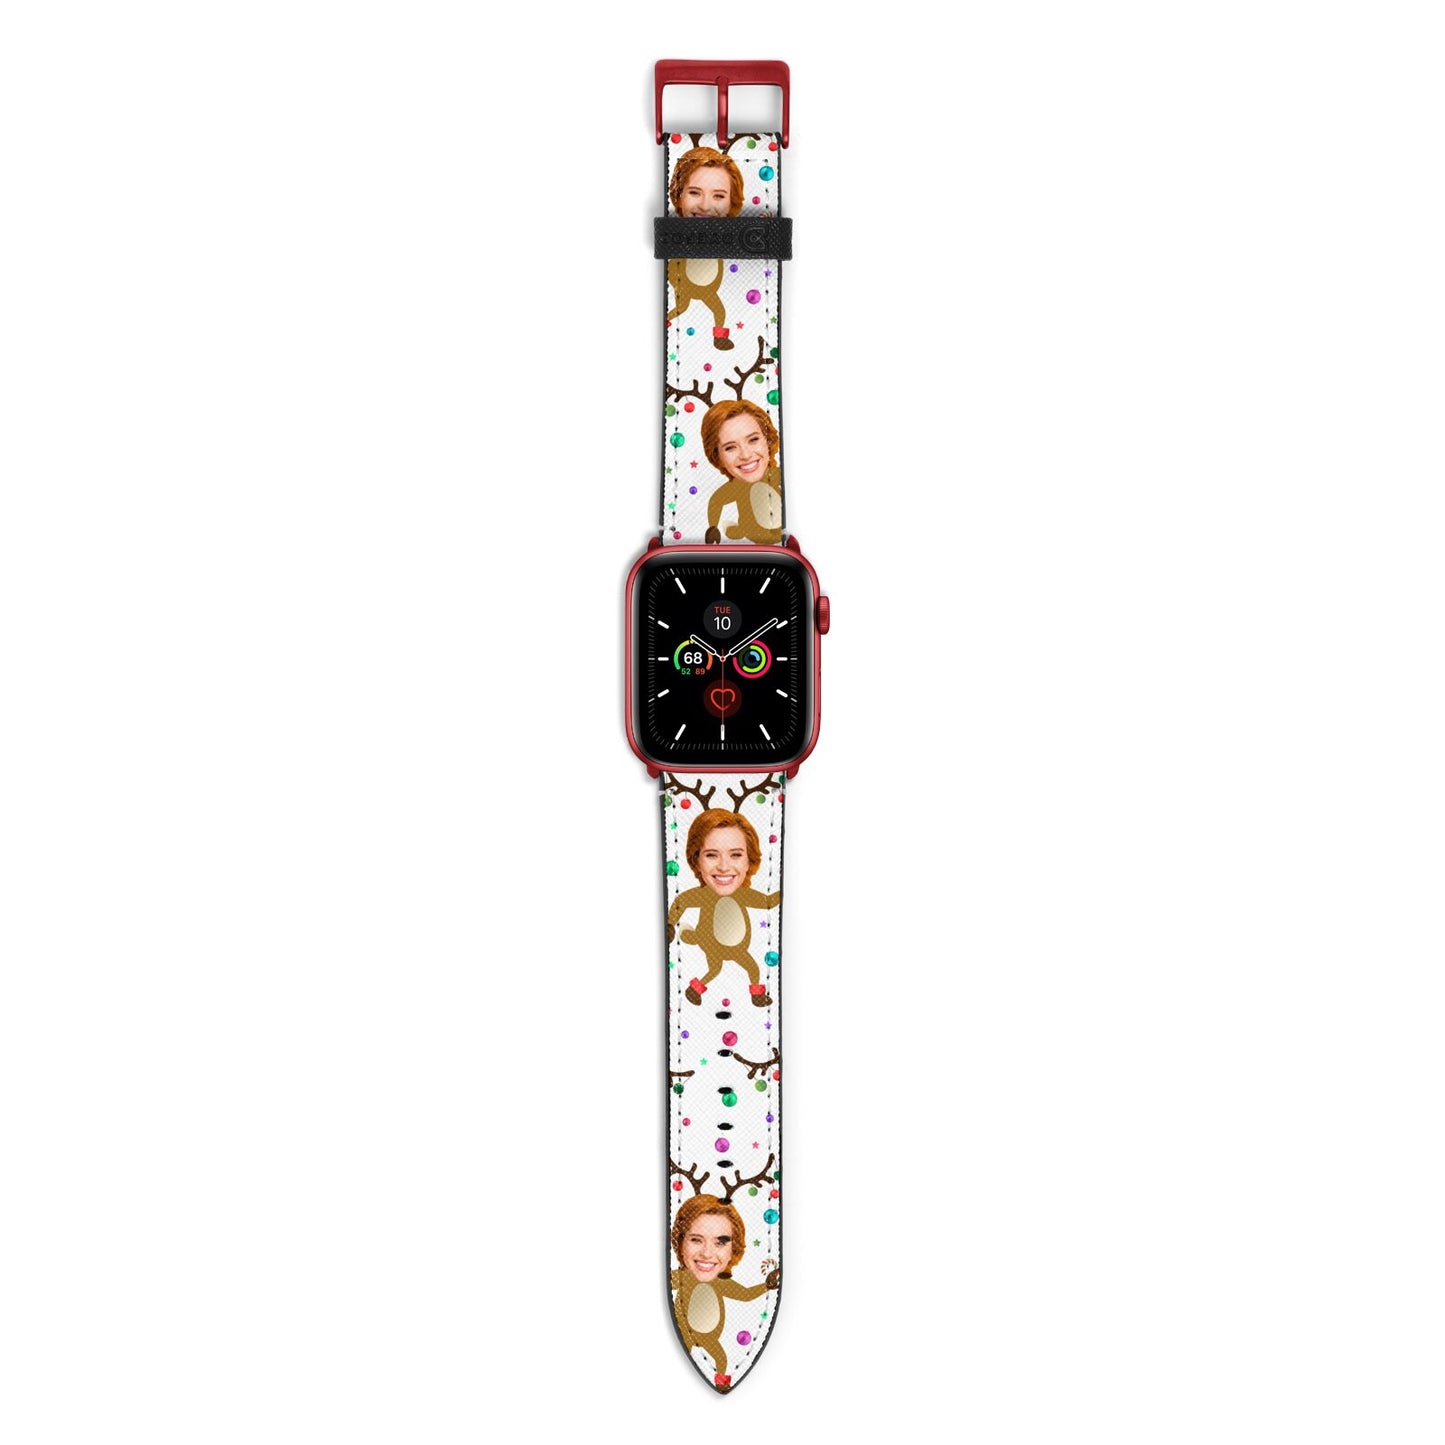 Reindeer Photo Face Apple Watch Strap with Red Hardware